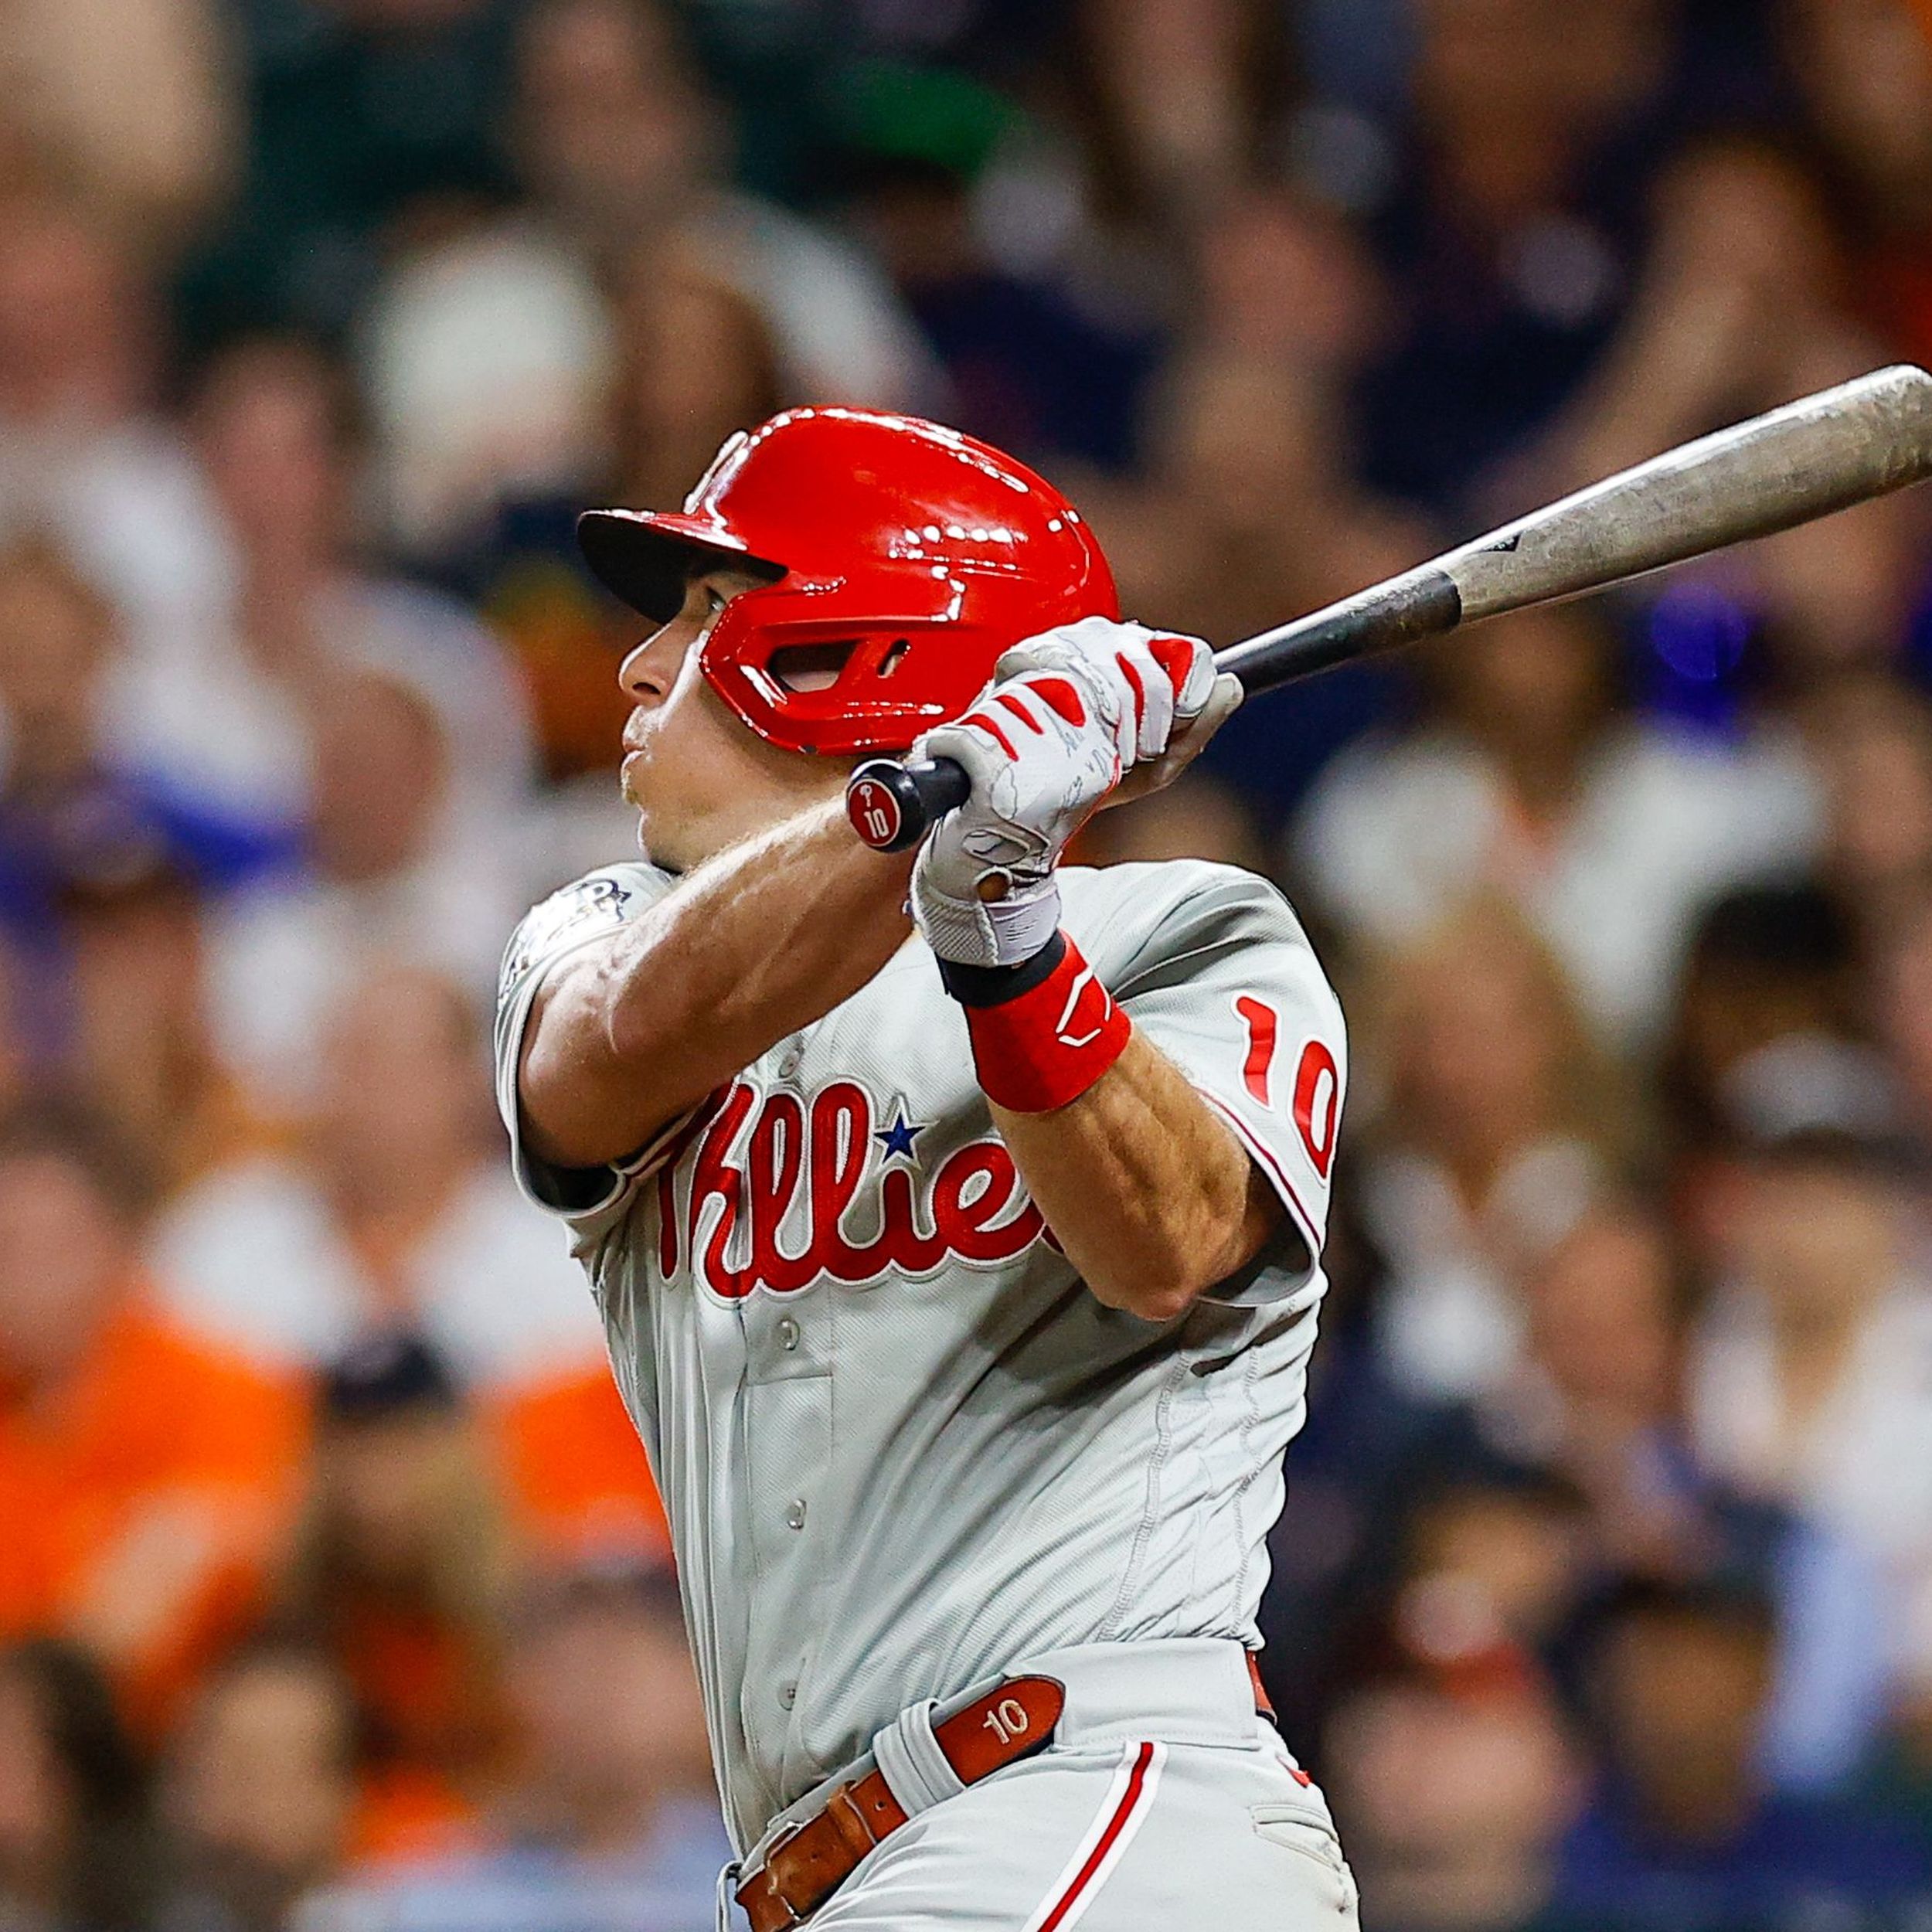 Phillies' J.T. Realmuto is defying the aging curve, setting new